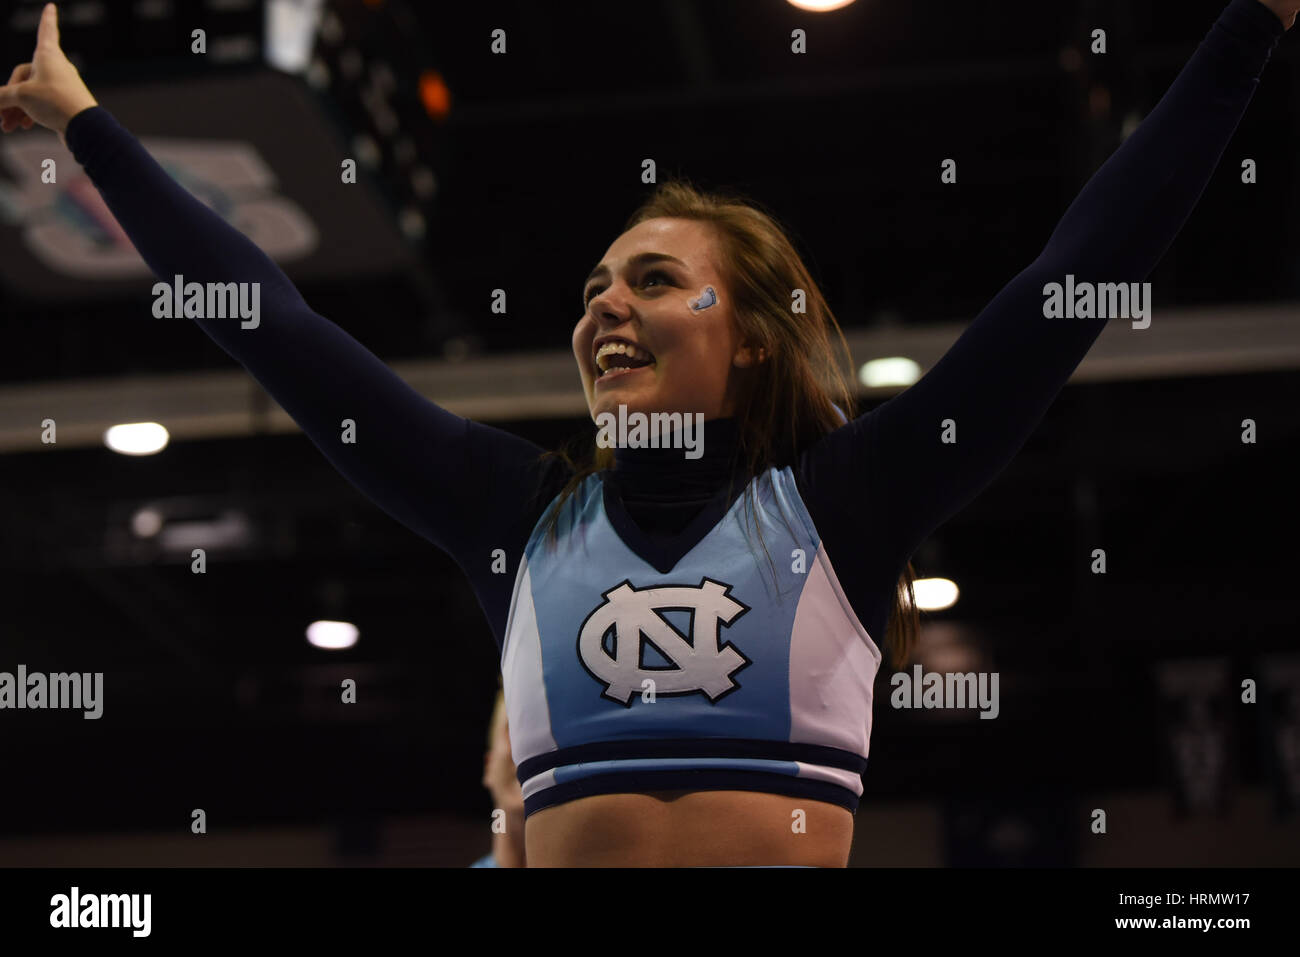 CONWAY, SC - MARCH 02: A North Carolina cheerleader performs for the fans during the game between the North Carolina Tarheels and the Syracuse Orange in the ACC Women's Tournament on March 2, 2017 at HTC Center in Conway, SC. William Howard/CSM Stock Photo